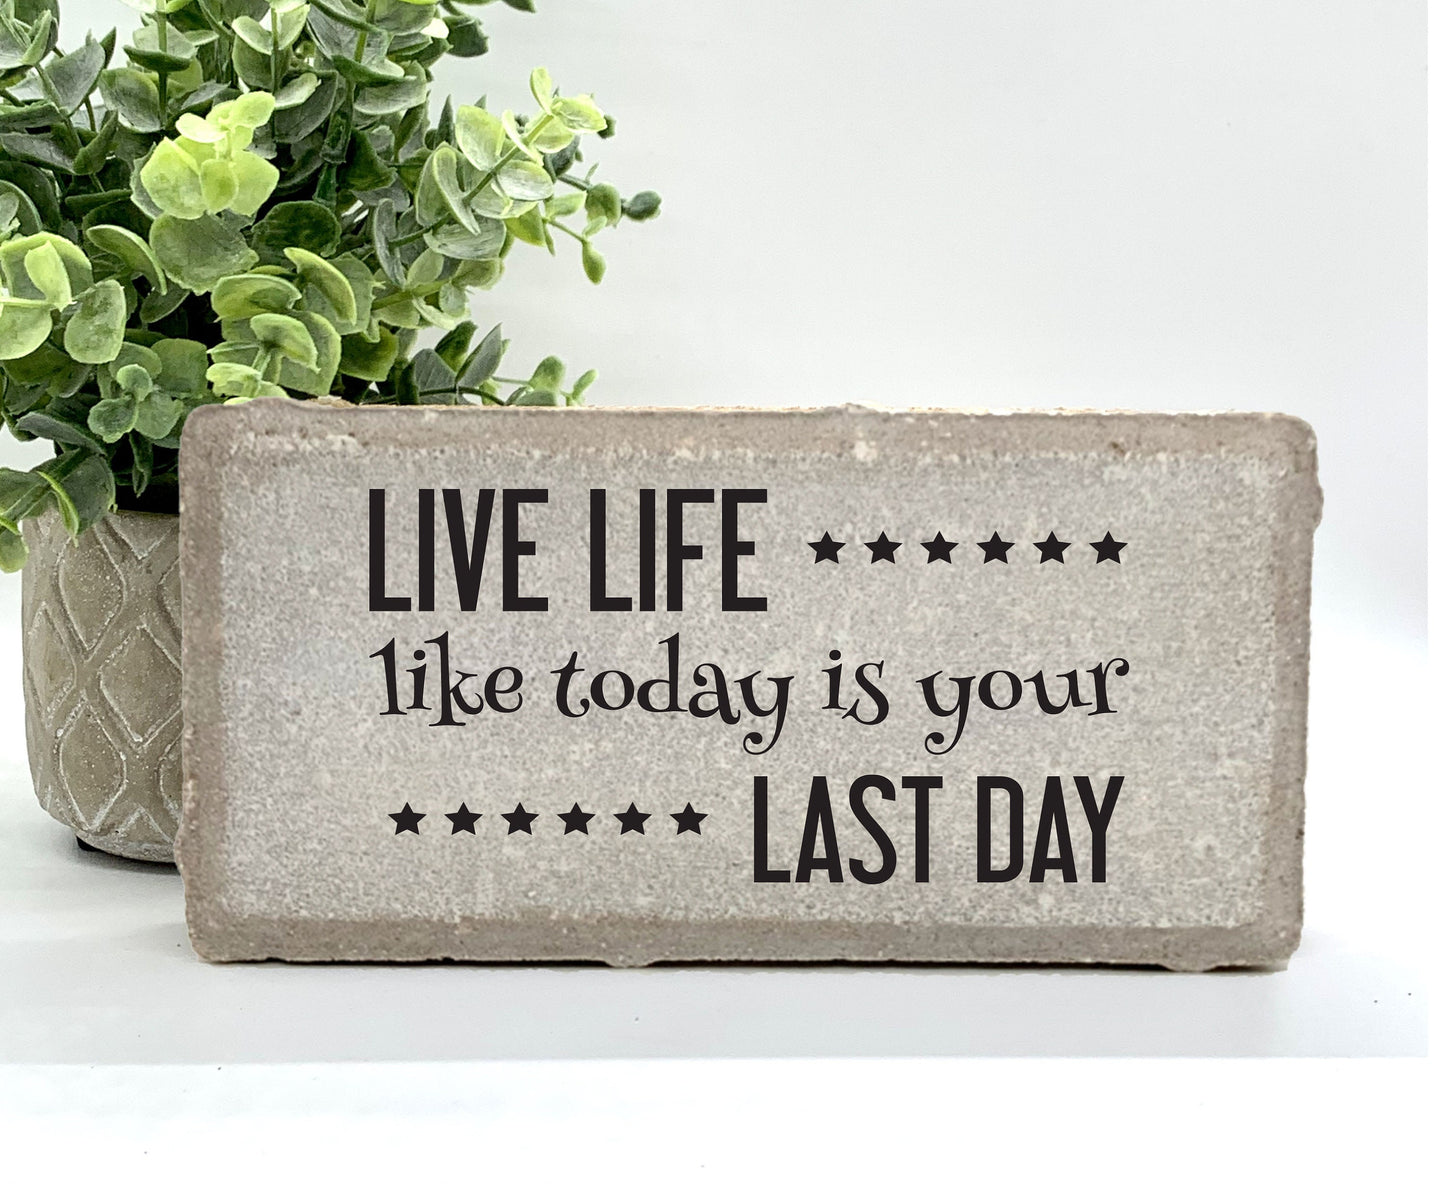 Live life like today is your last day -Motivational Stone- Motivational Sign - Inspirational Gift - Friends Gift - Family Gift -Stone Choice